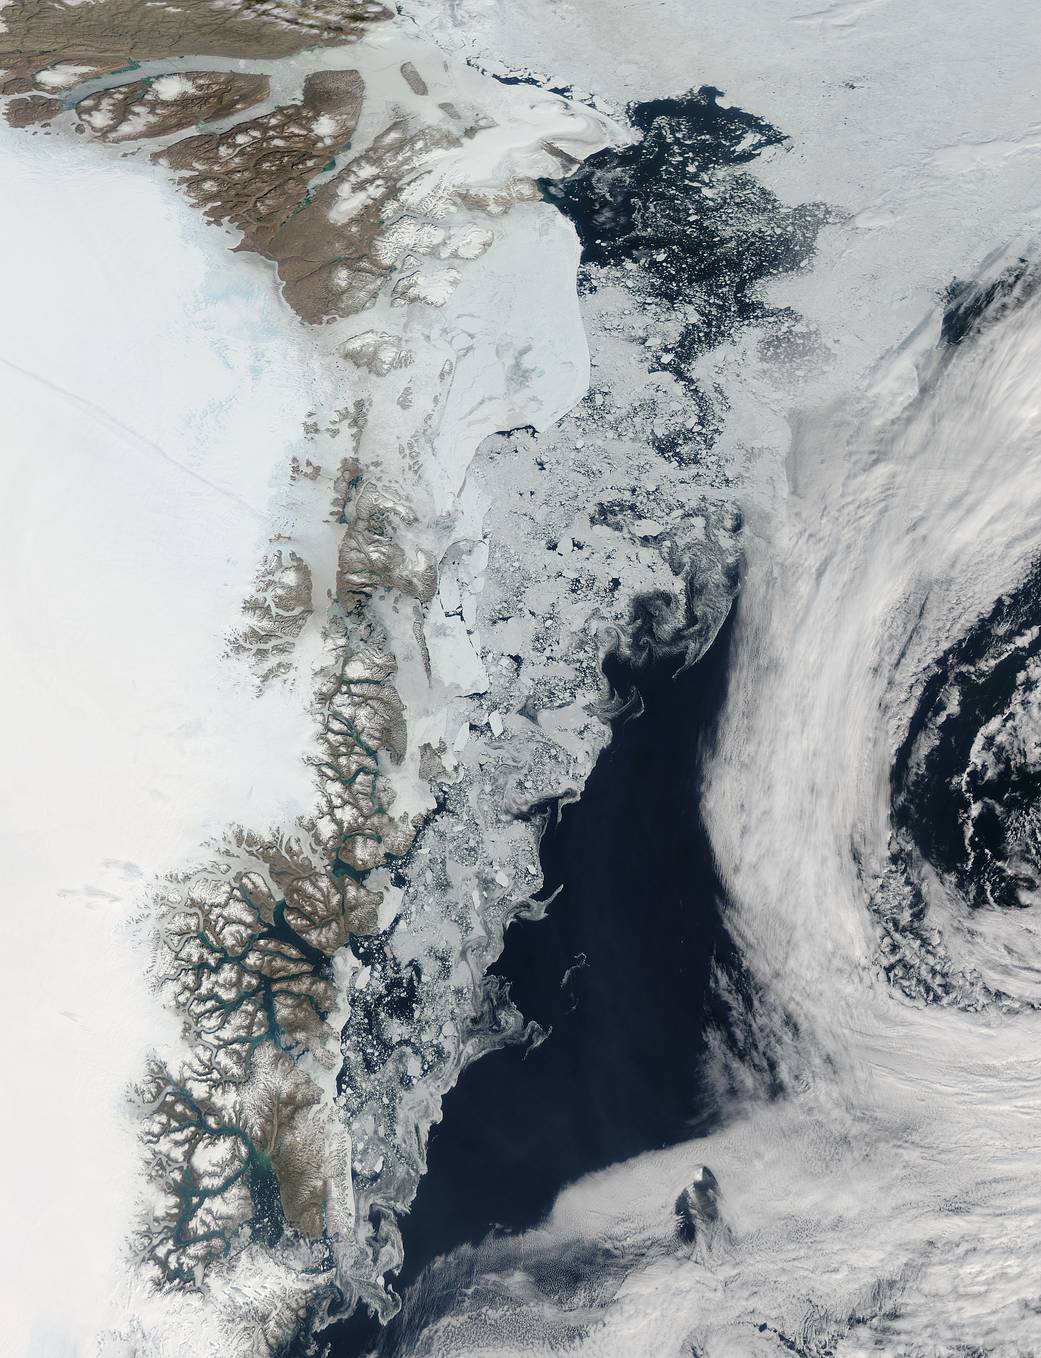 Swirls of sea ice along the coast and dark blue waters of the Arctic